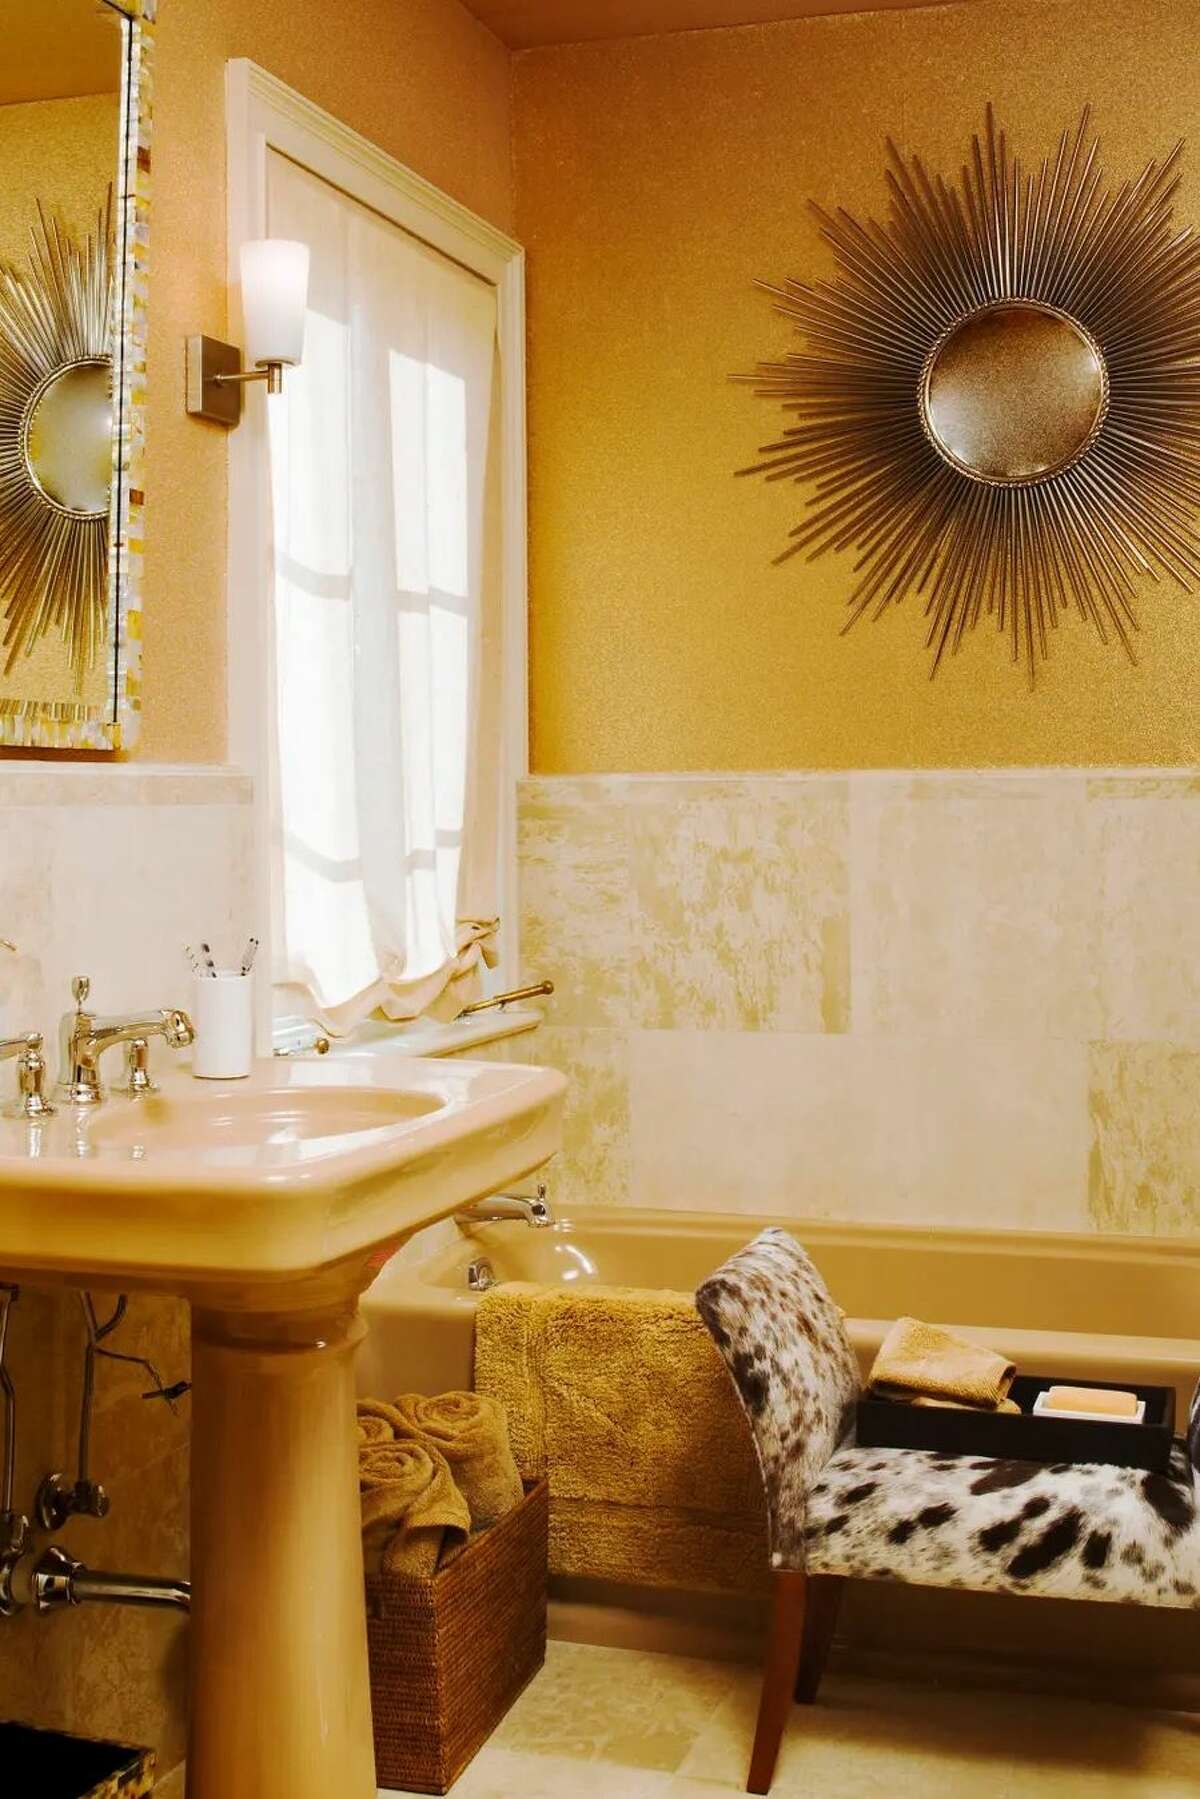 20 Brilliant Bathroom Lighting Ideas for Every Style | CT Post